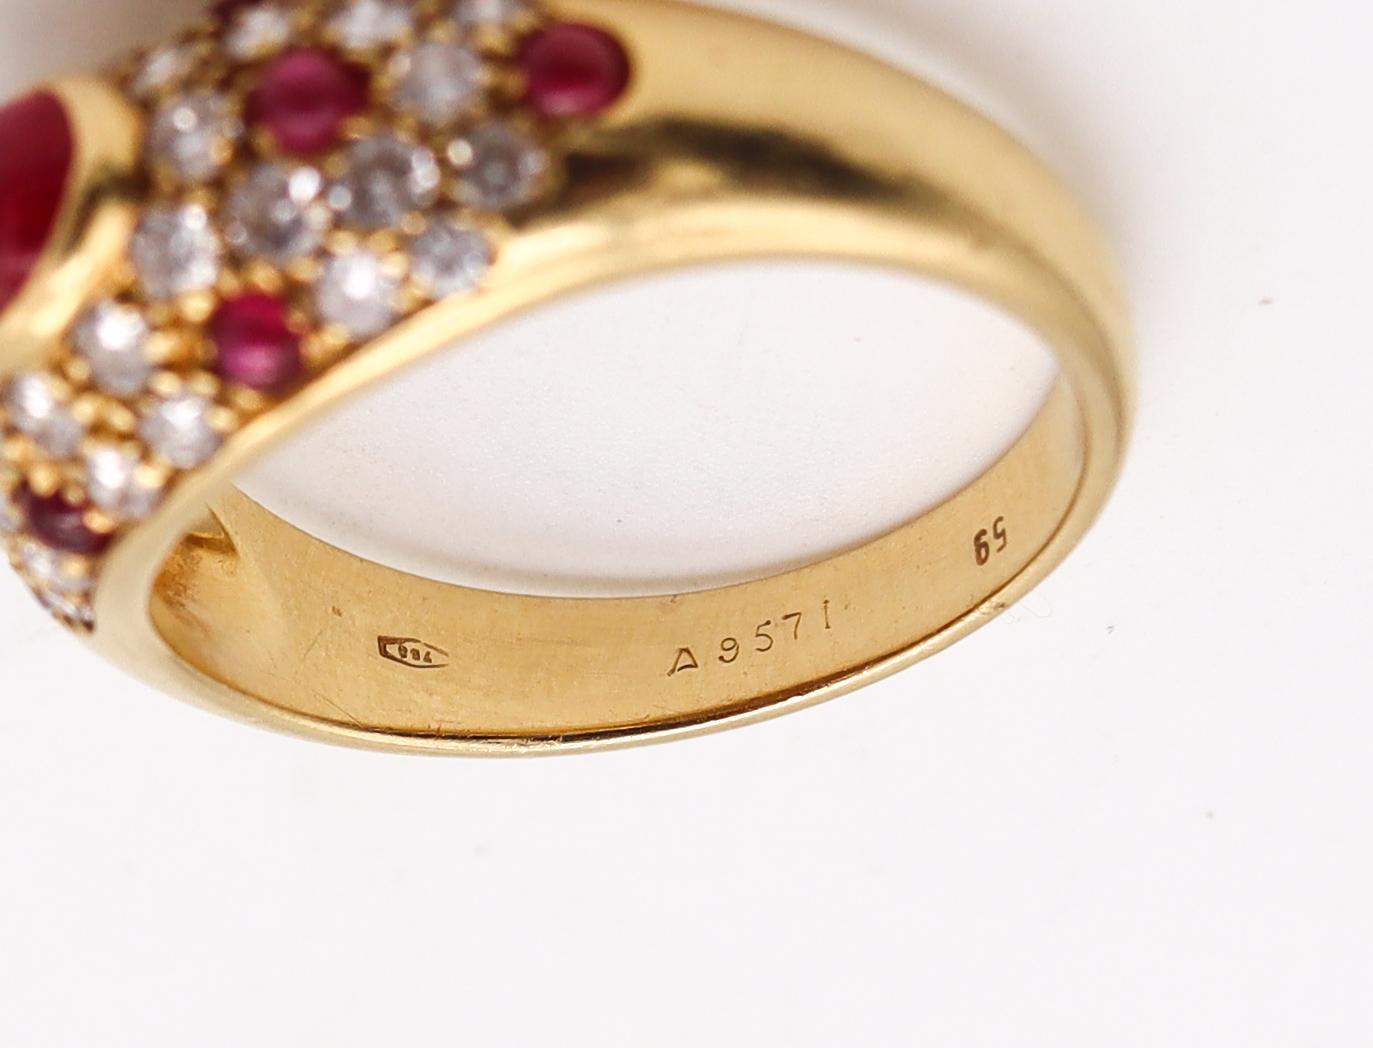 Brilliant Cut Cartier Paris 1970 Corinth Ring in 18kt Gold with 2.83ctw in Diamonds & Rubies For Sale